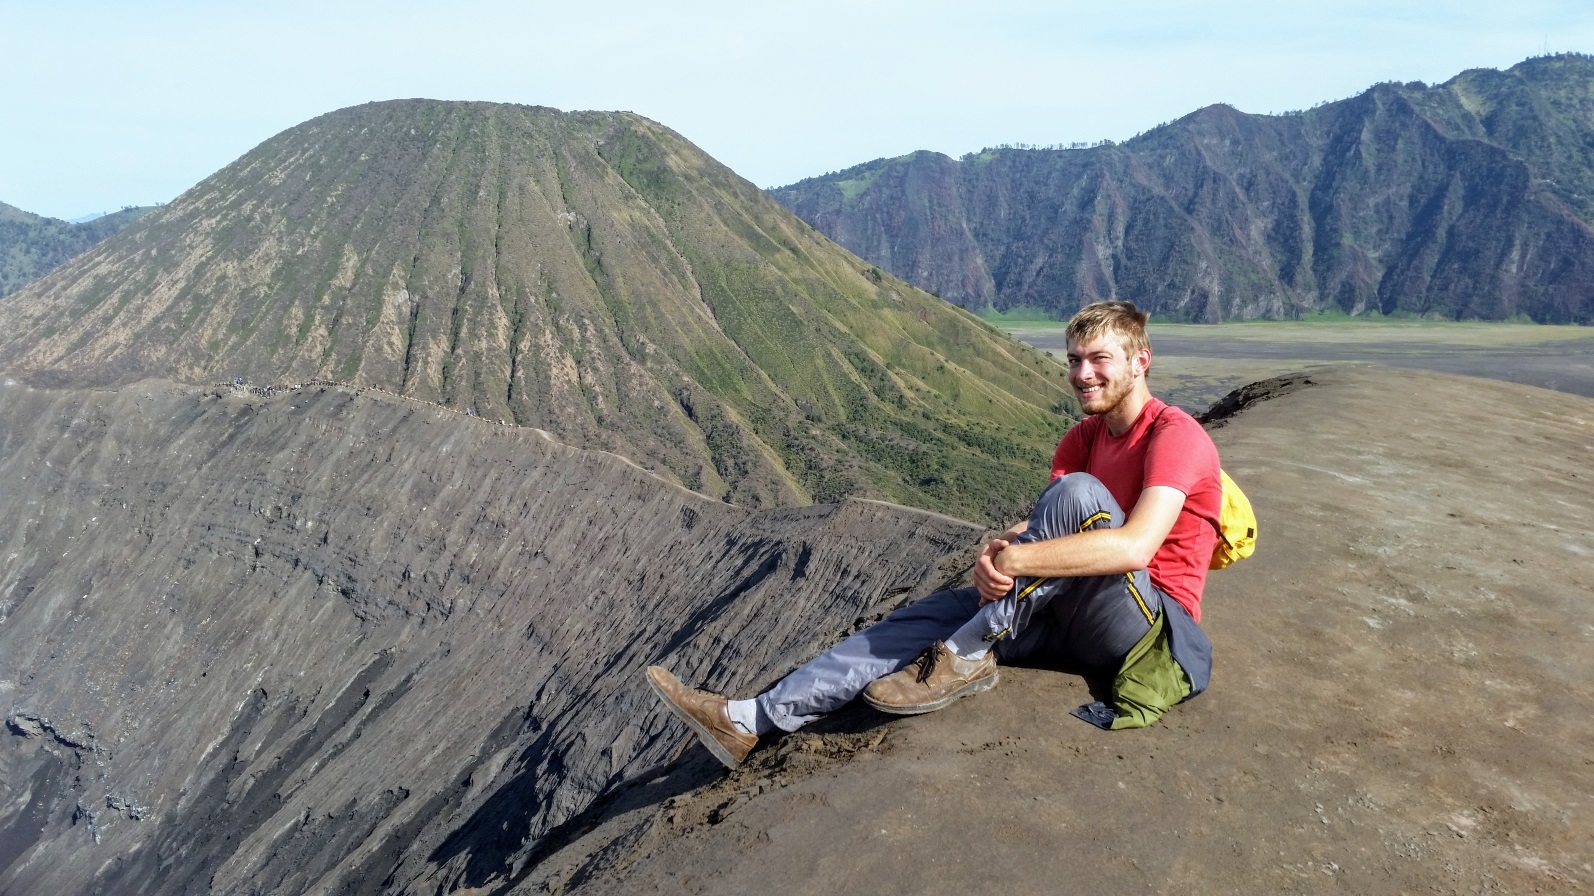 Me on the edge of a volcano!